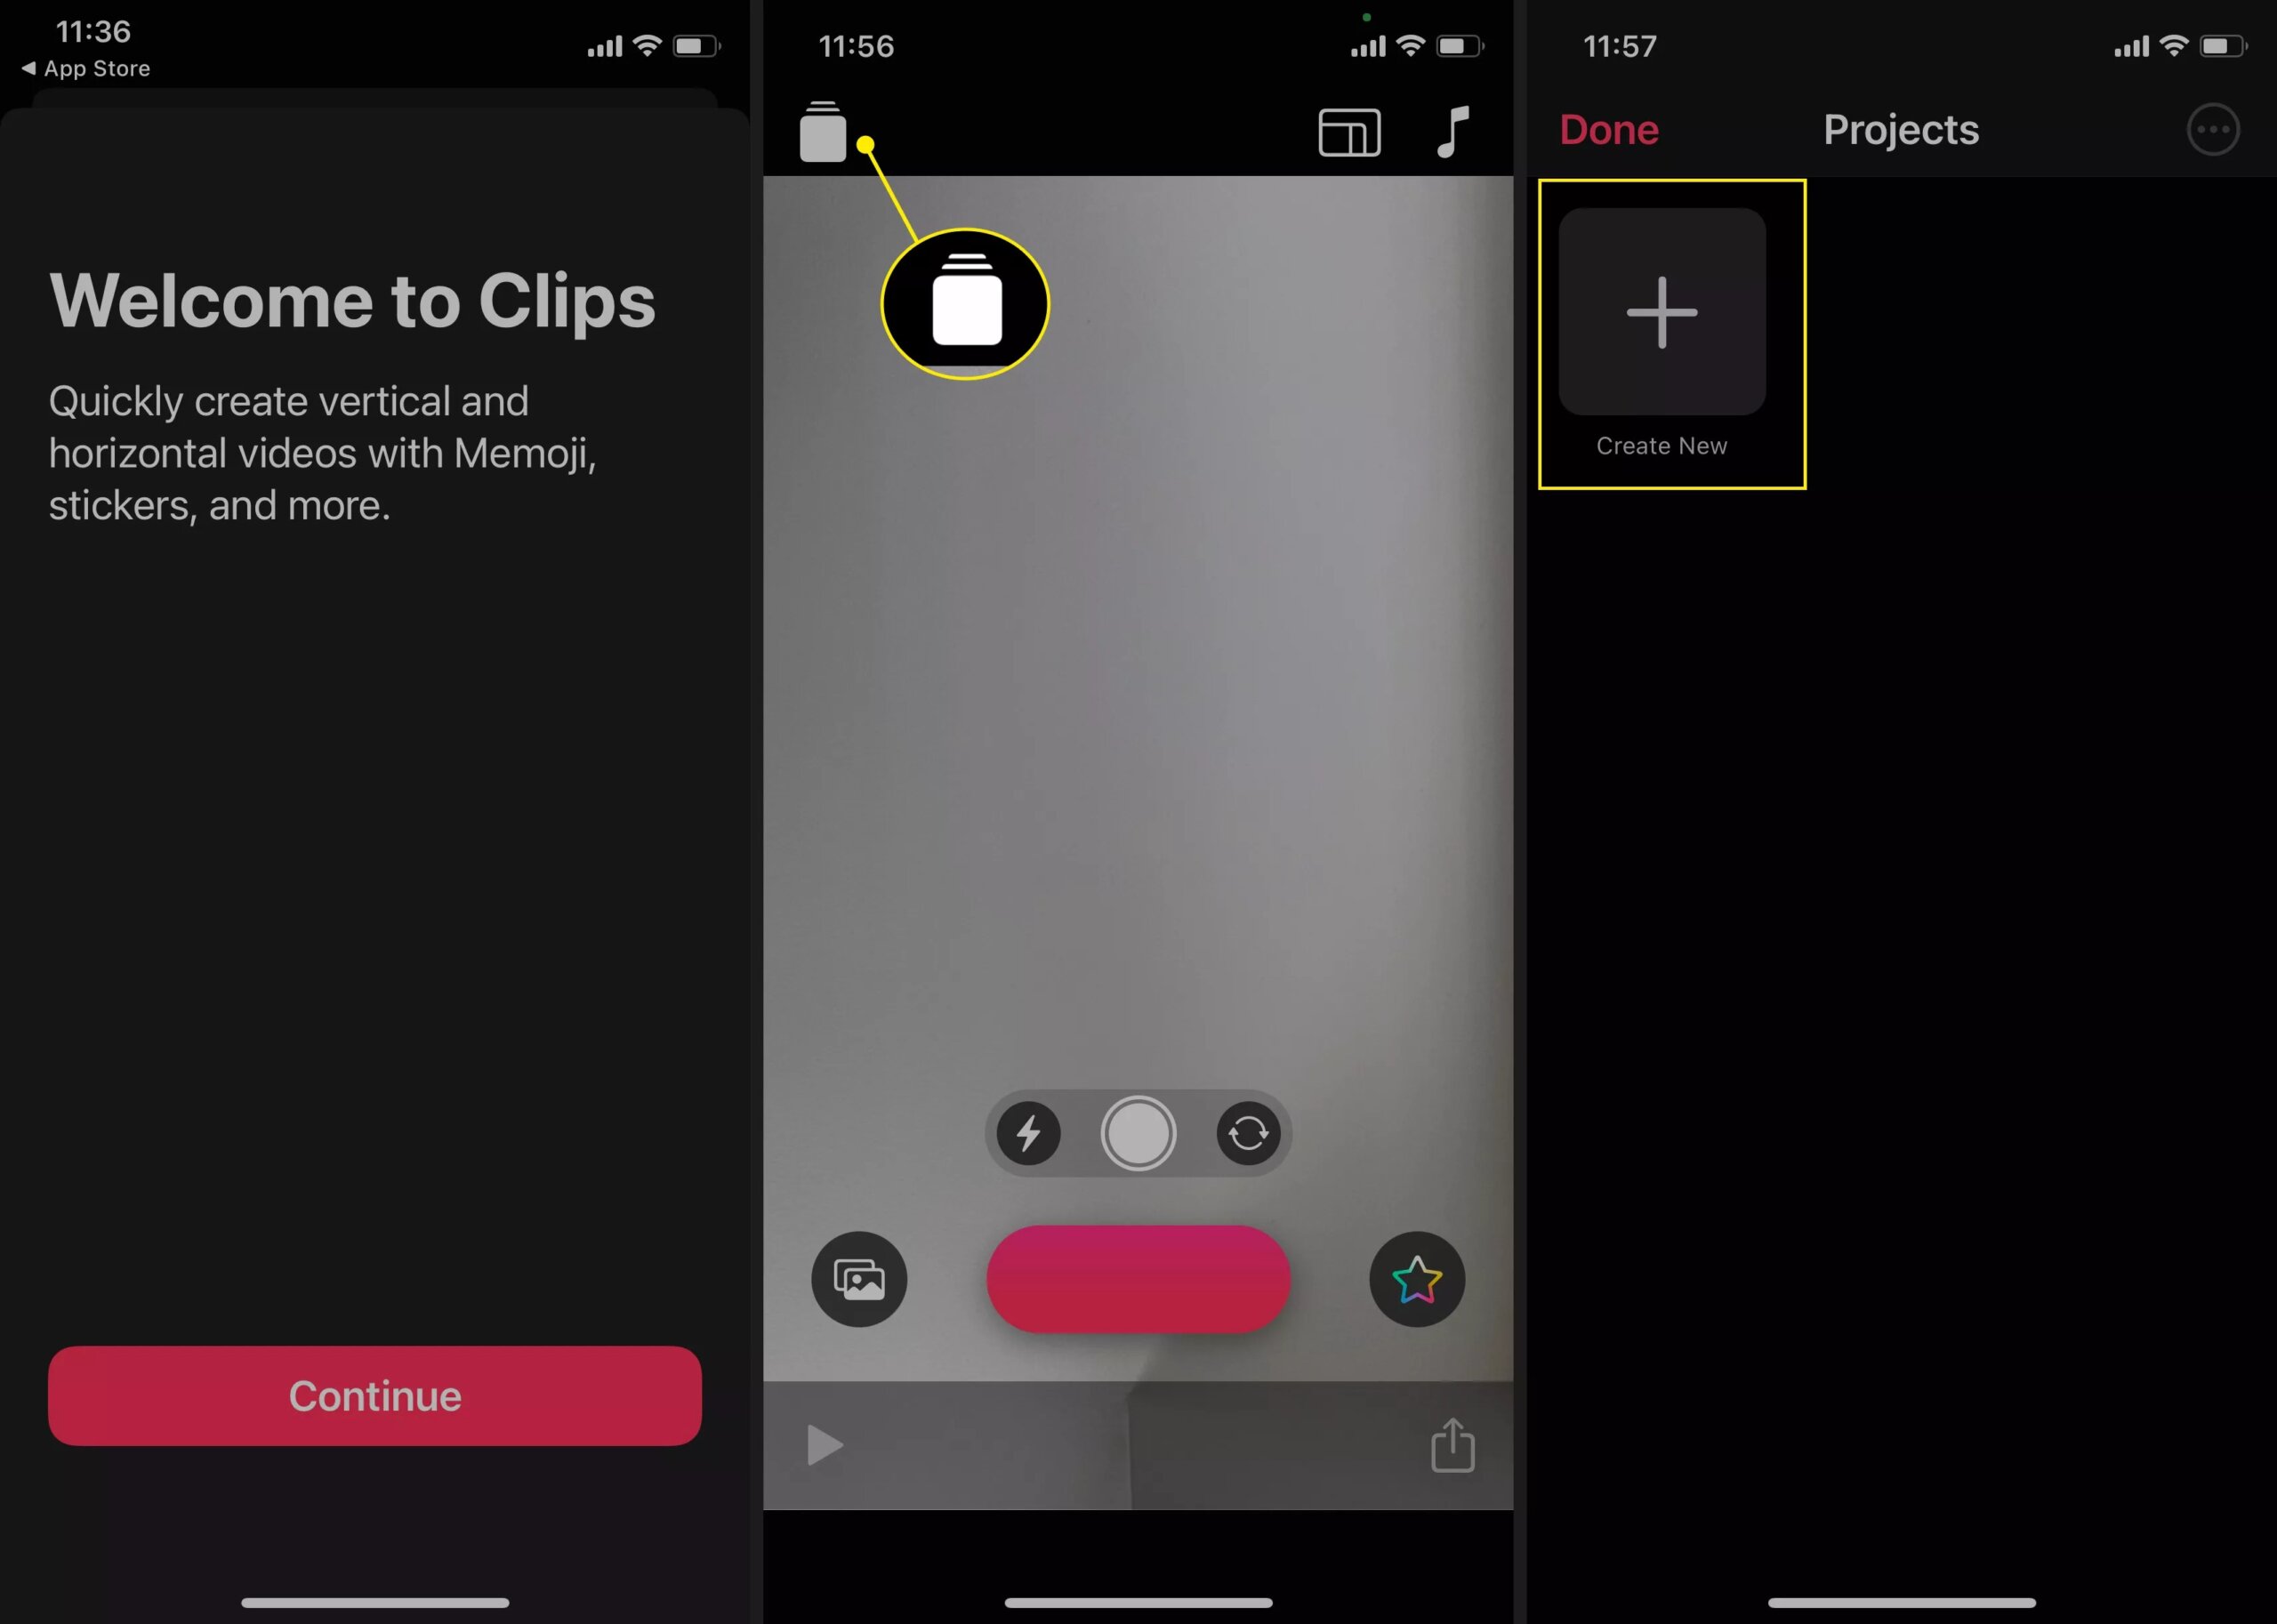 How to make videos on iPhone using the available Clips app